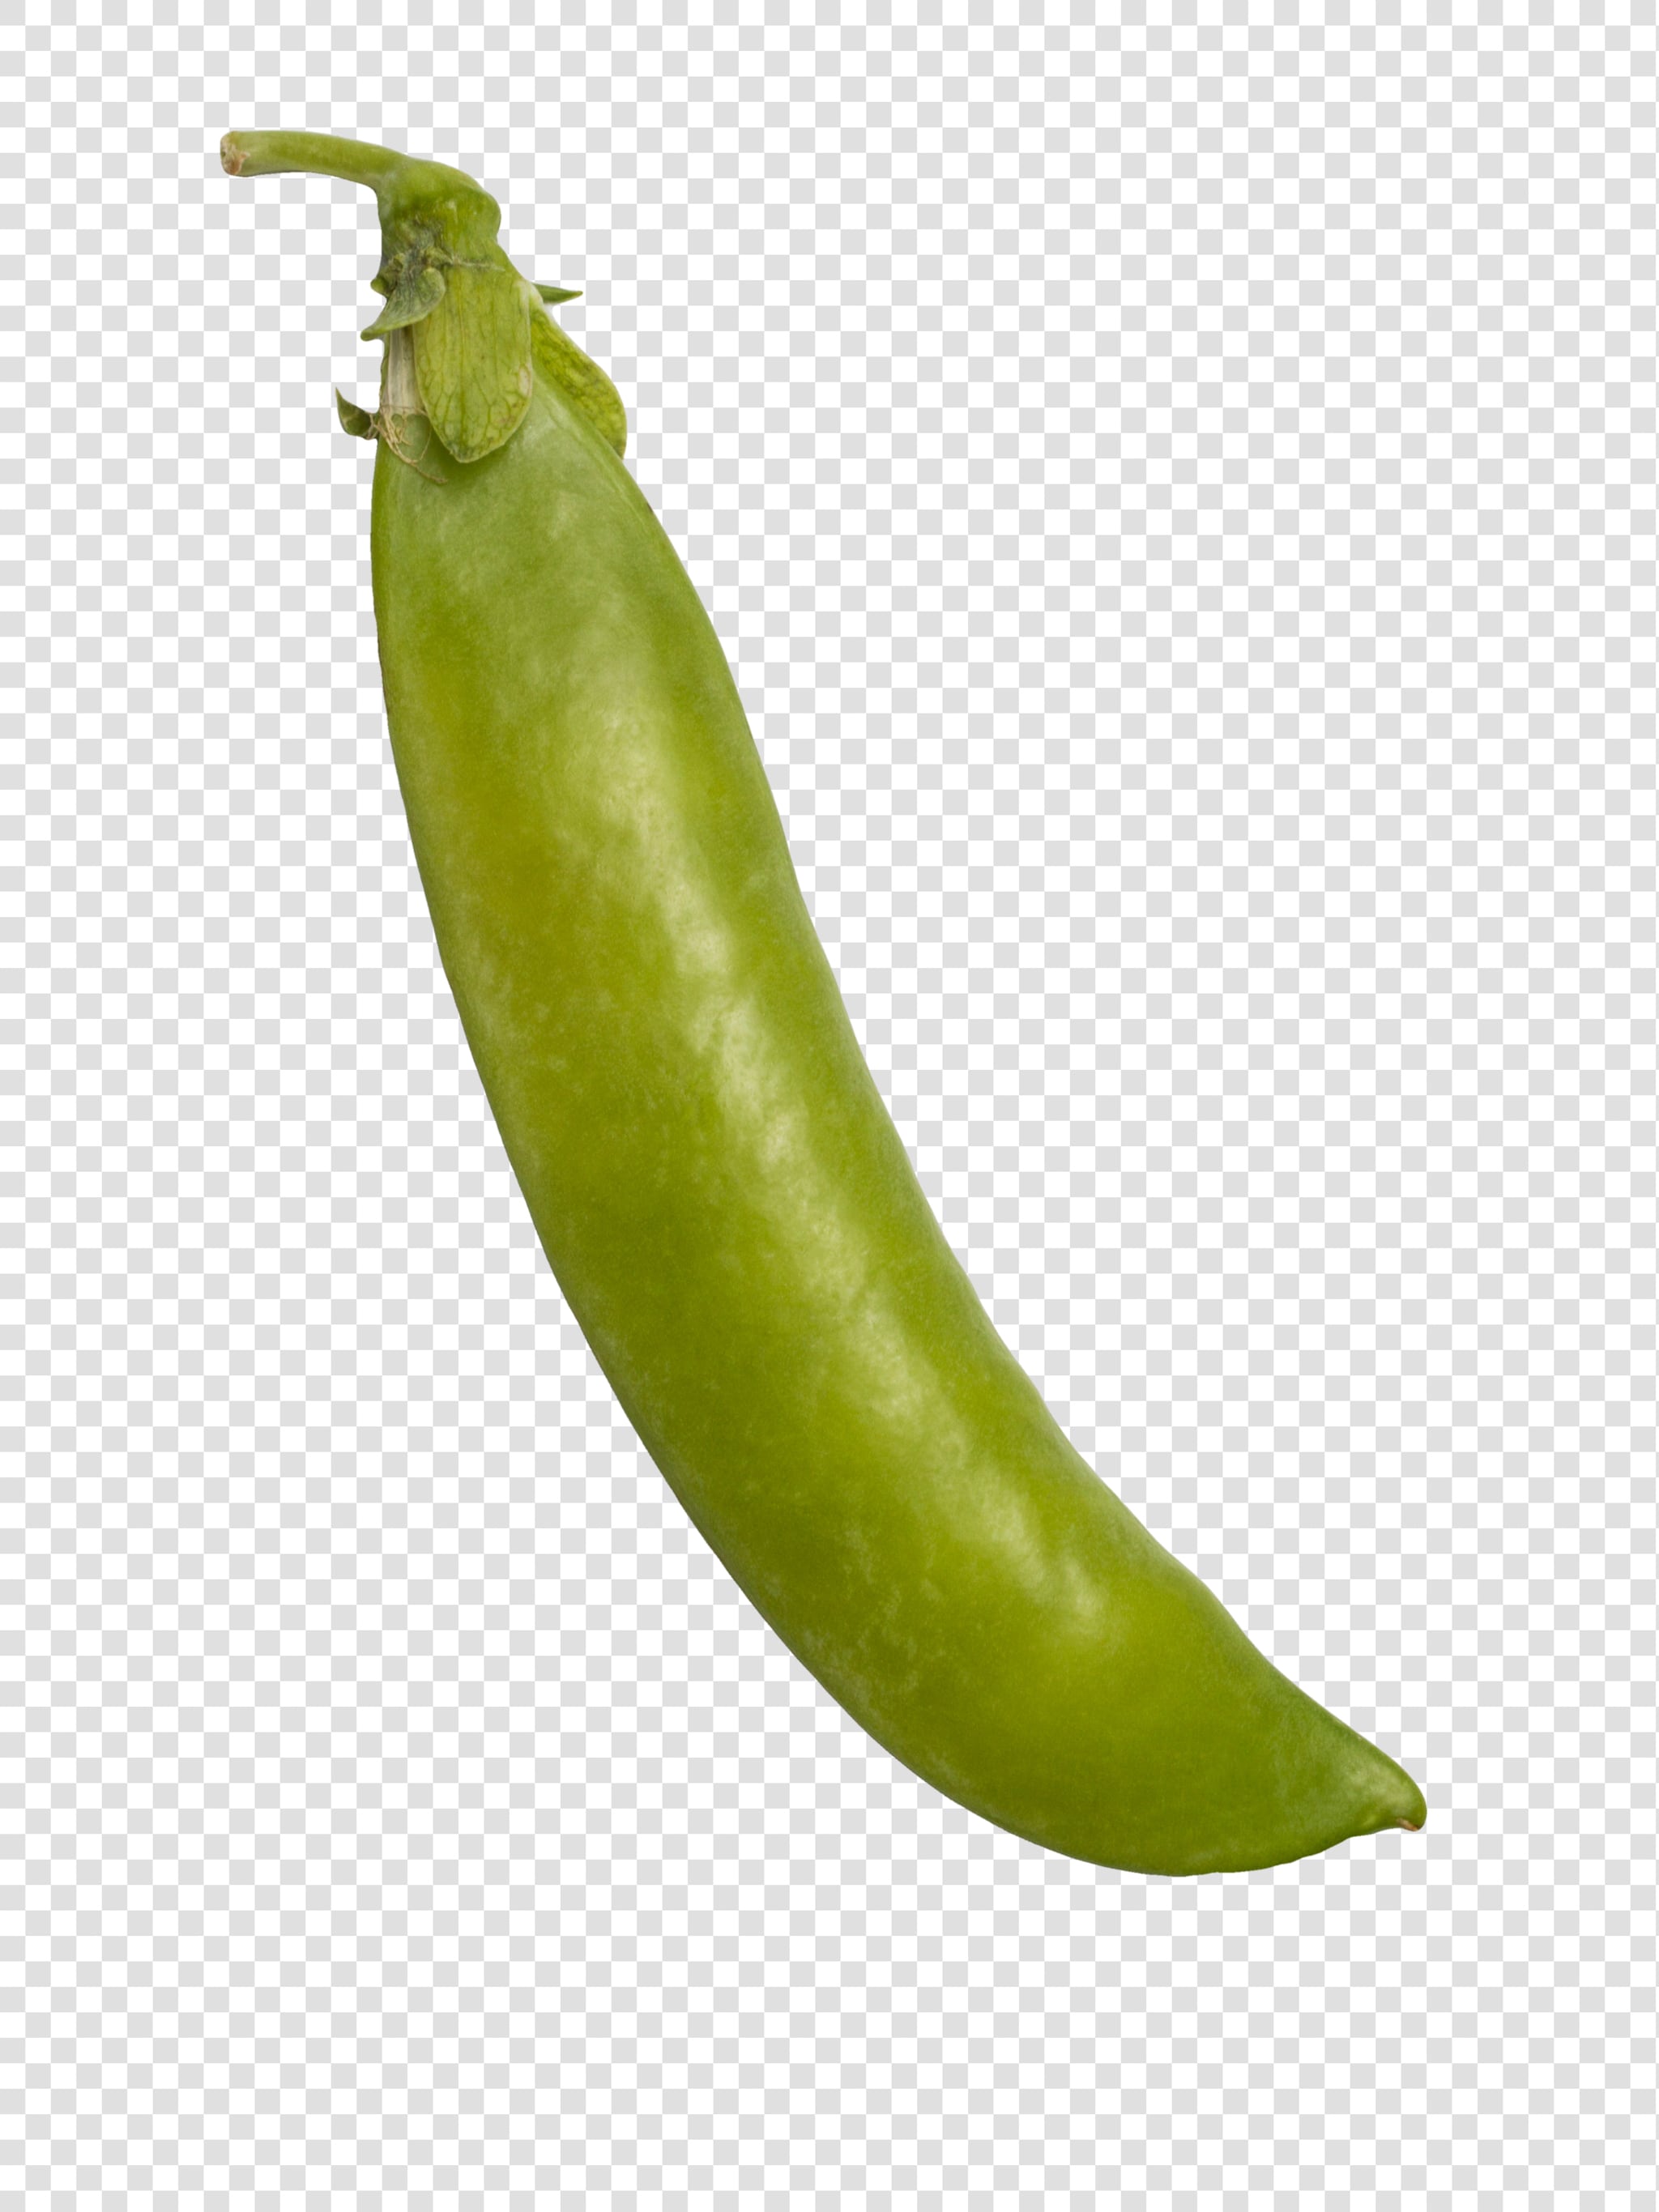 Green Pea image asset with transparent background